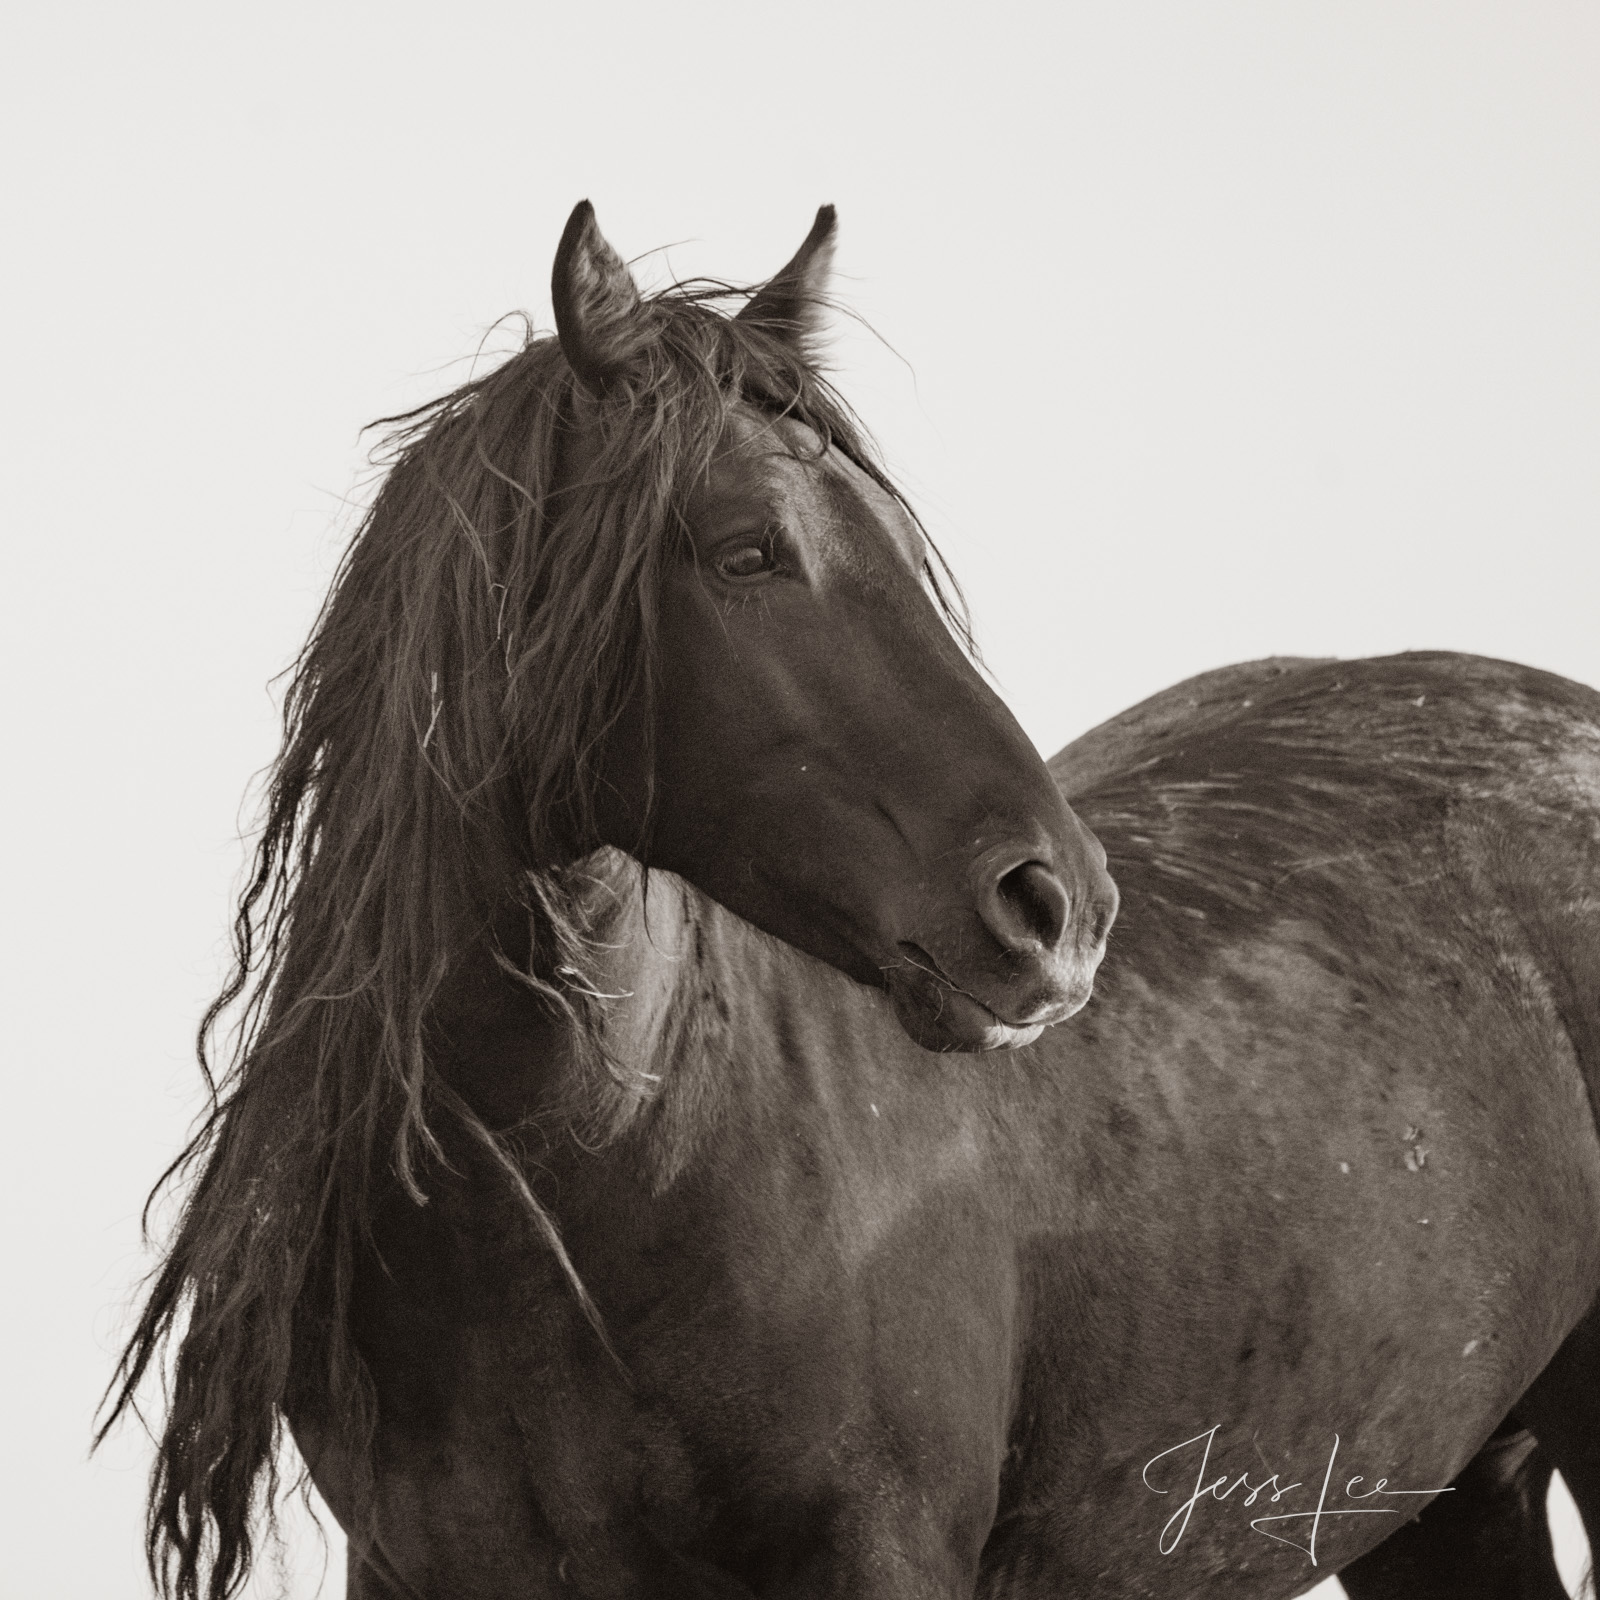 Black and White pictures of Horses | Wild Horses | Photos by Jess Lee